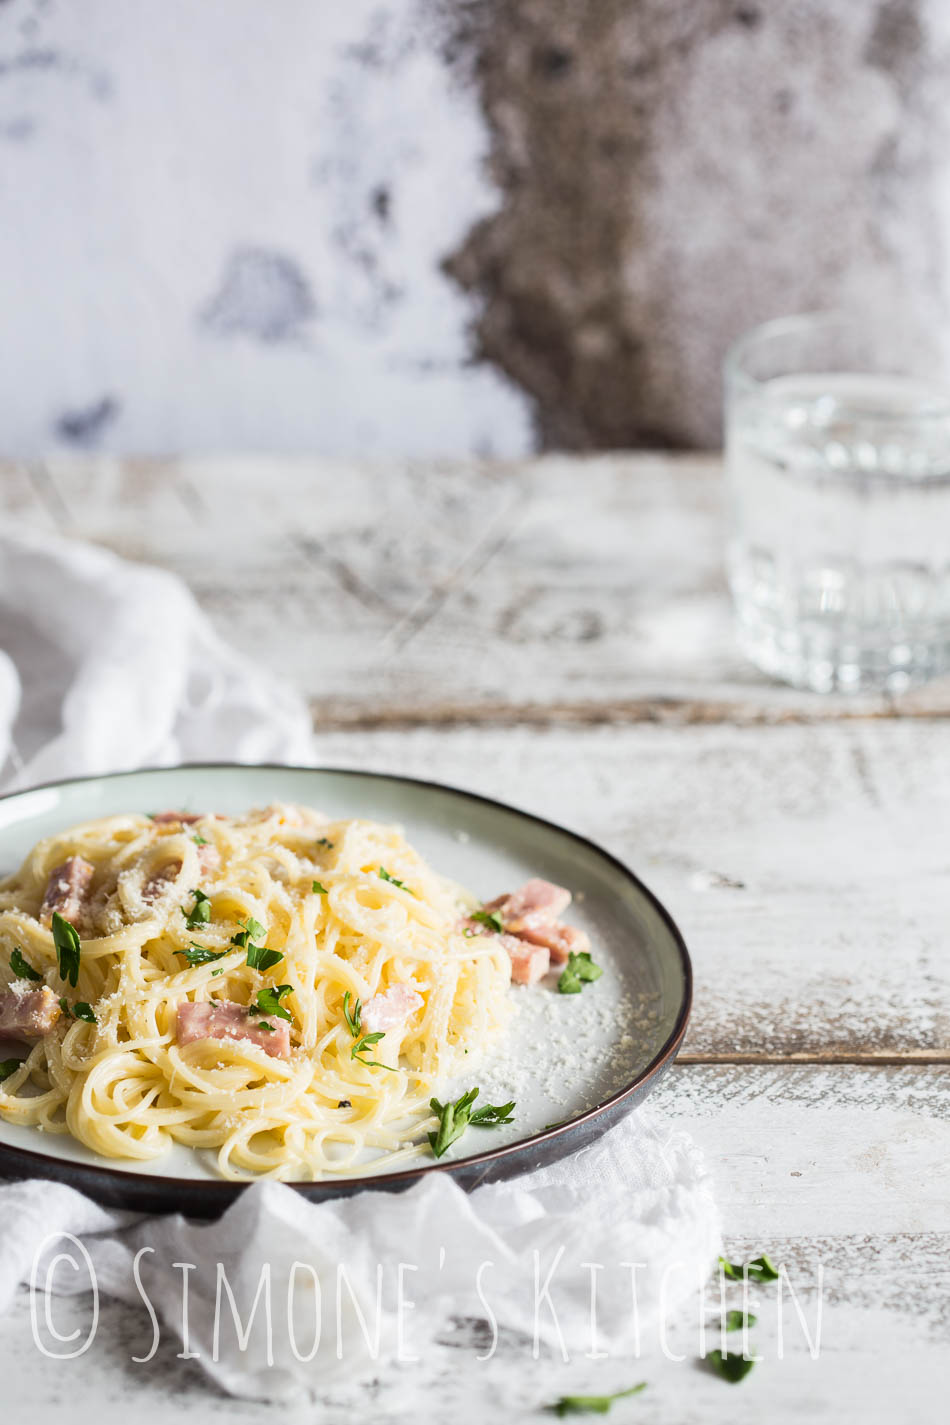 From Granny's kitchen - the remake: Pasta Carbonara